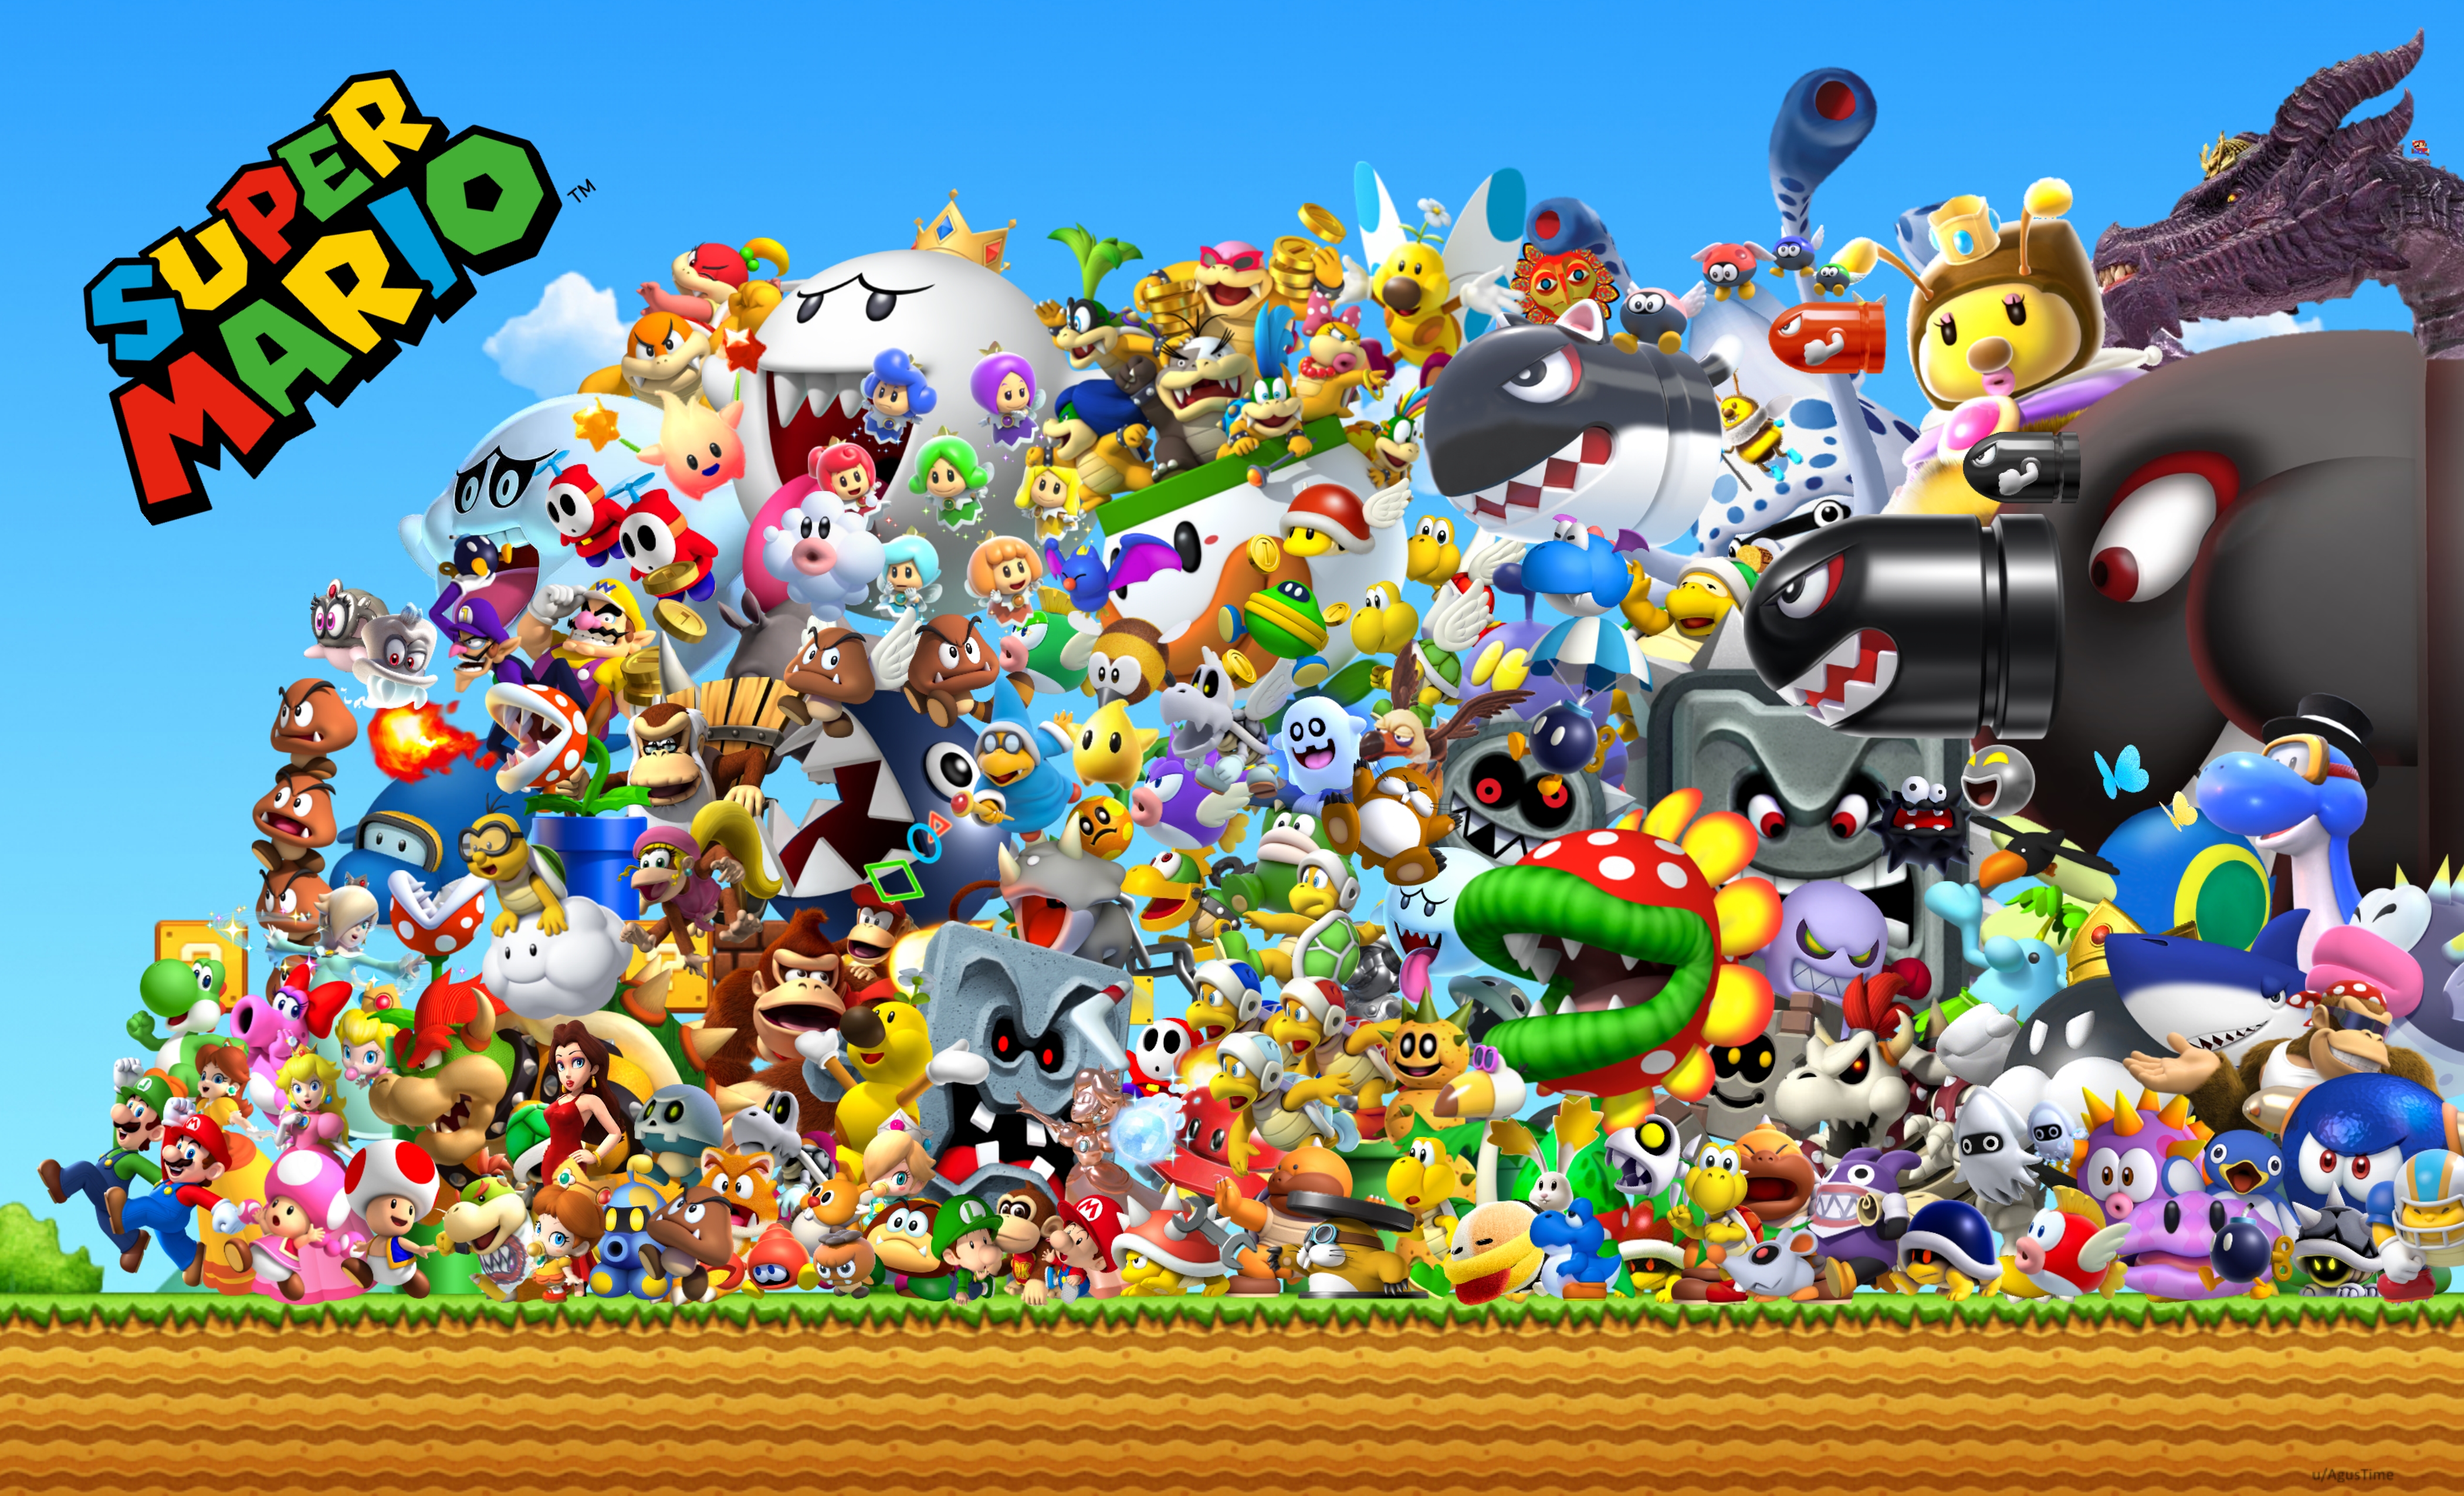 Made a wallpaper with over 150 characters to celebrate Mario's 35th Anniversary!: Mario